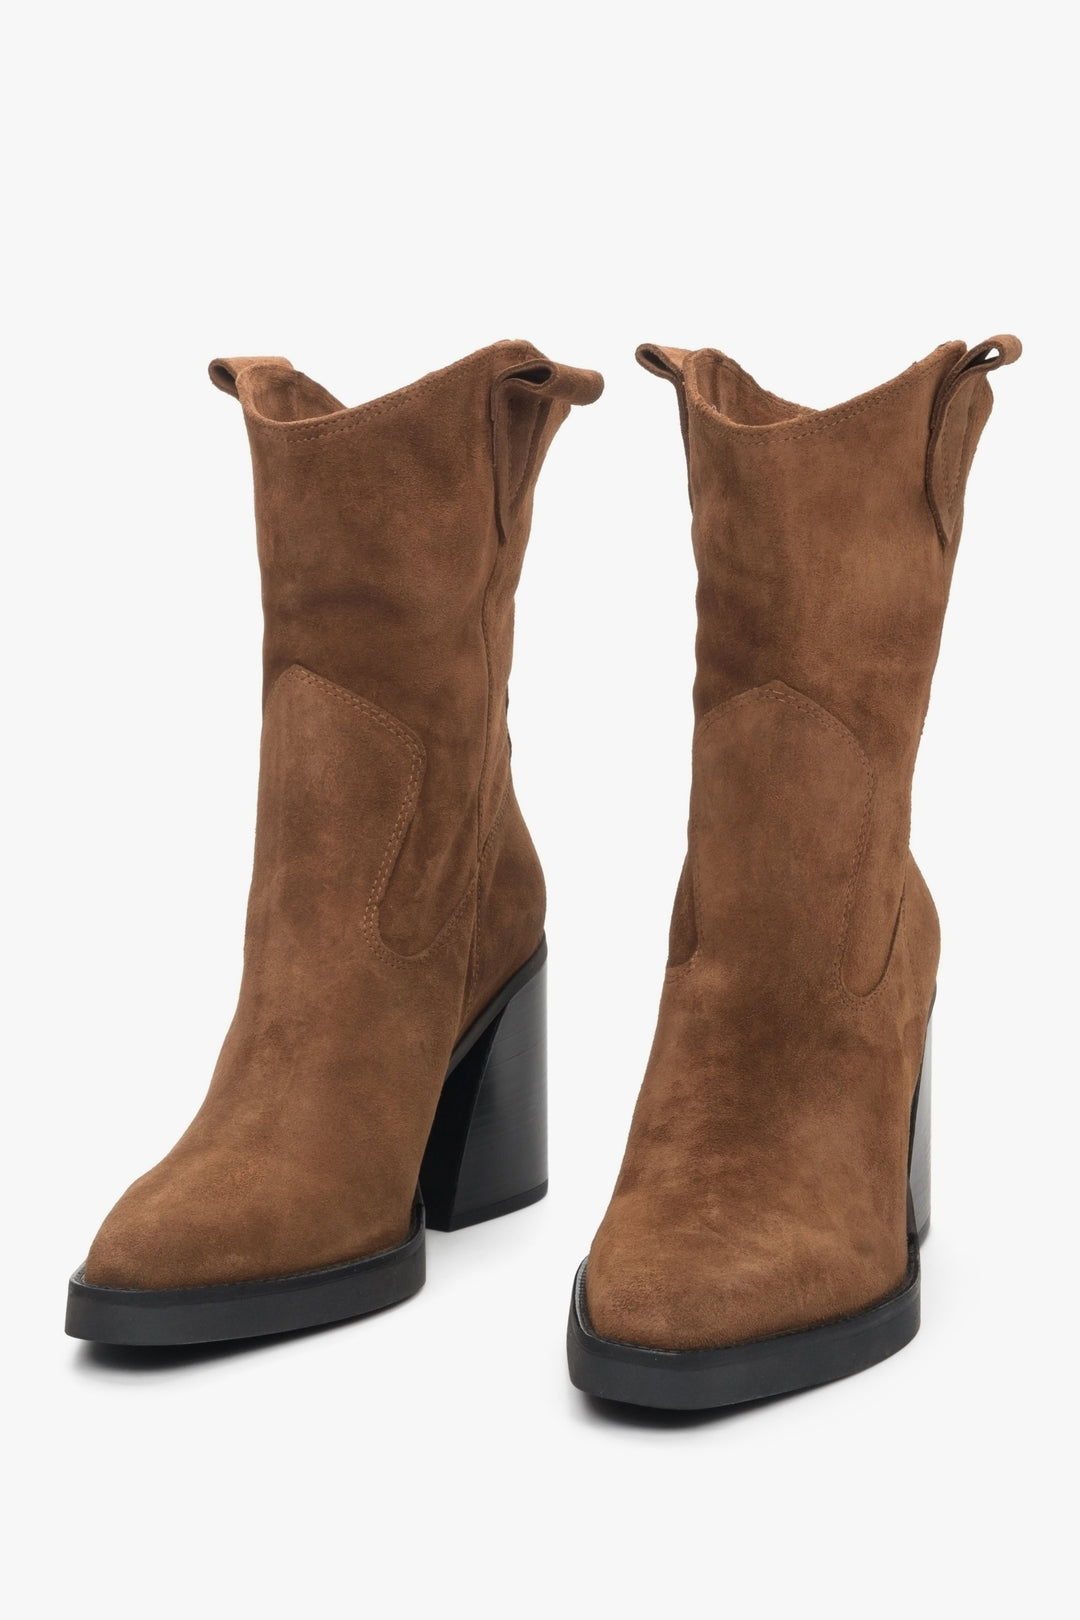 Women's brown suede cowboy boots with a pointed toe.